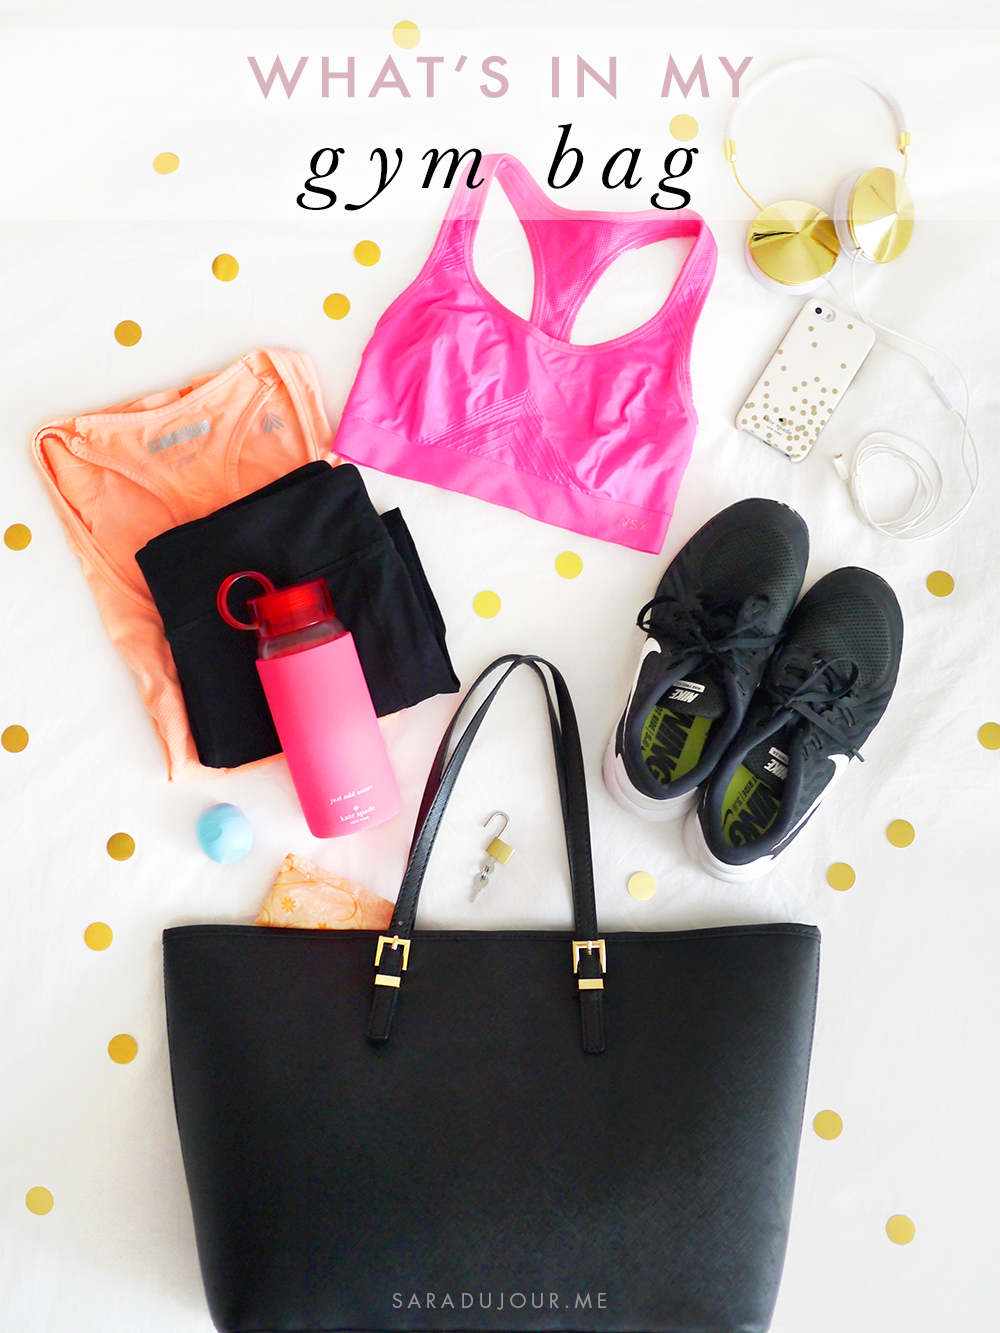 GYM ESSENTIALS FOR THE GIRLY AESTHETIC